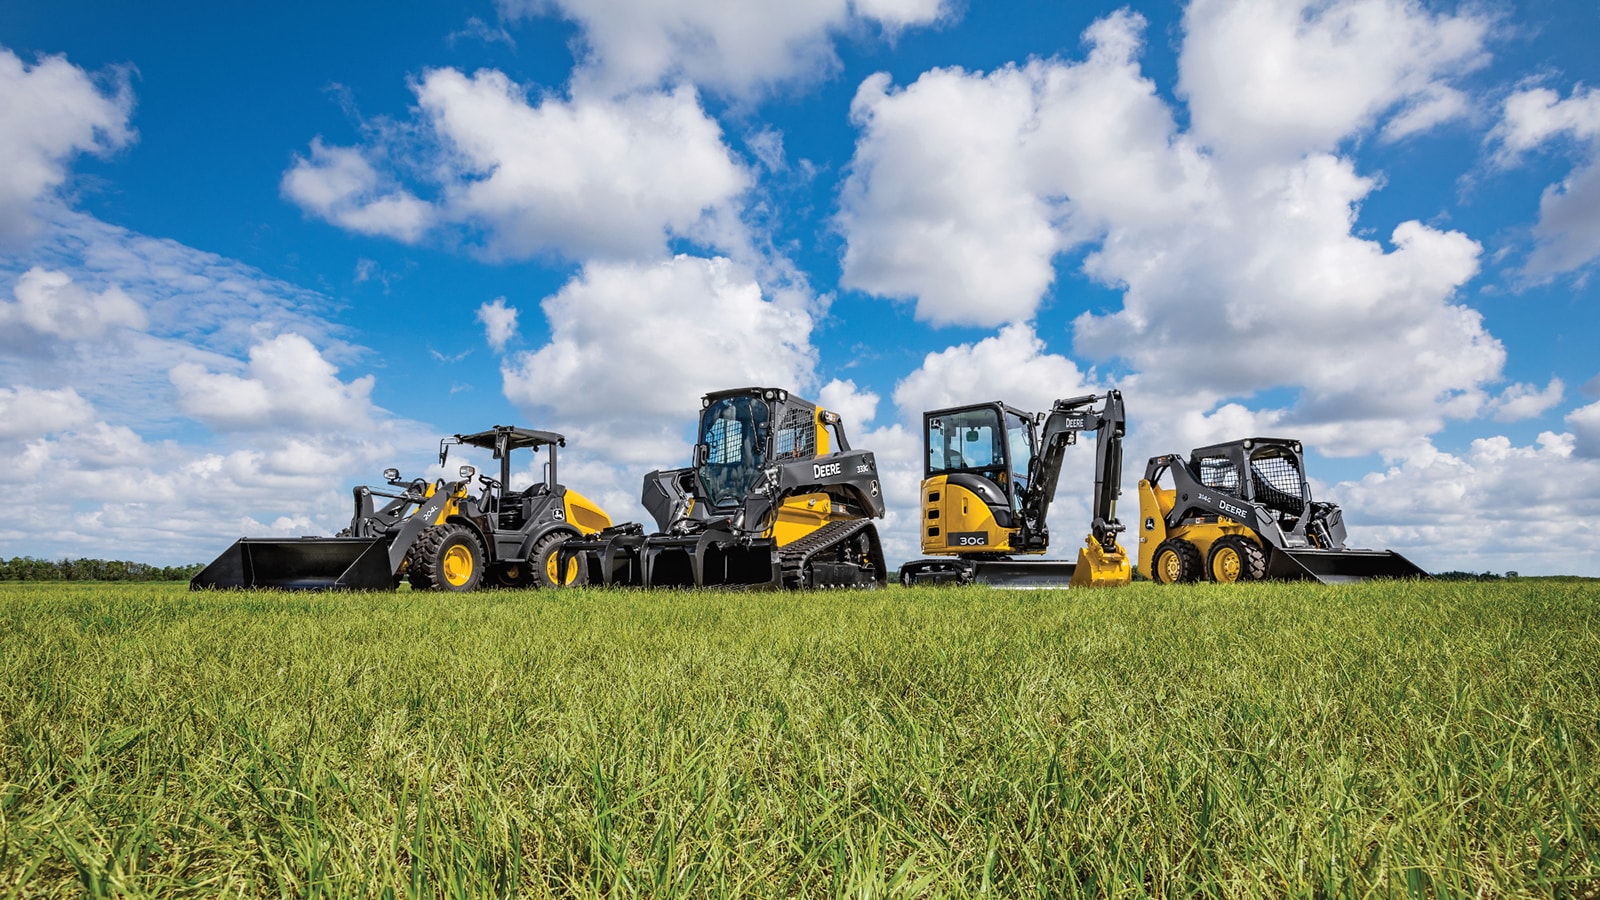 204L compact loader, 333G tracked skid steer, 30g mini excavator and 314G wheeled skid steer parked in a green grassy field with blue sky with white clouds in the background